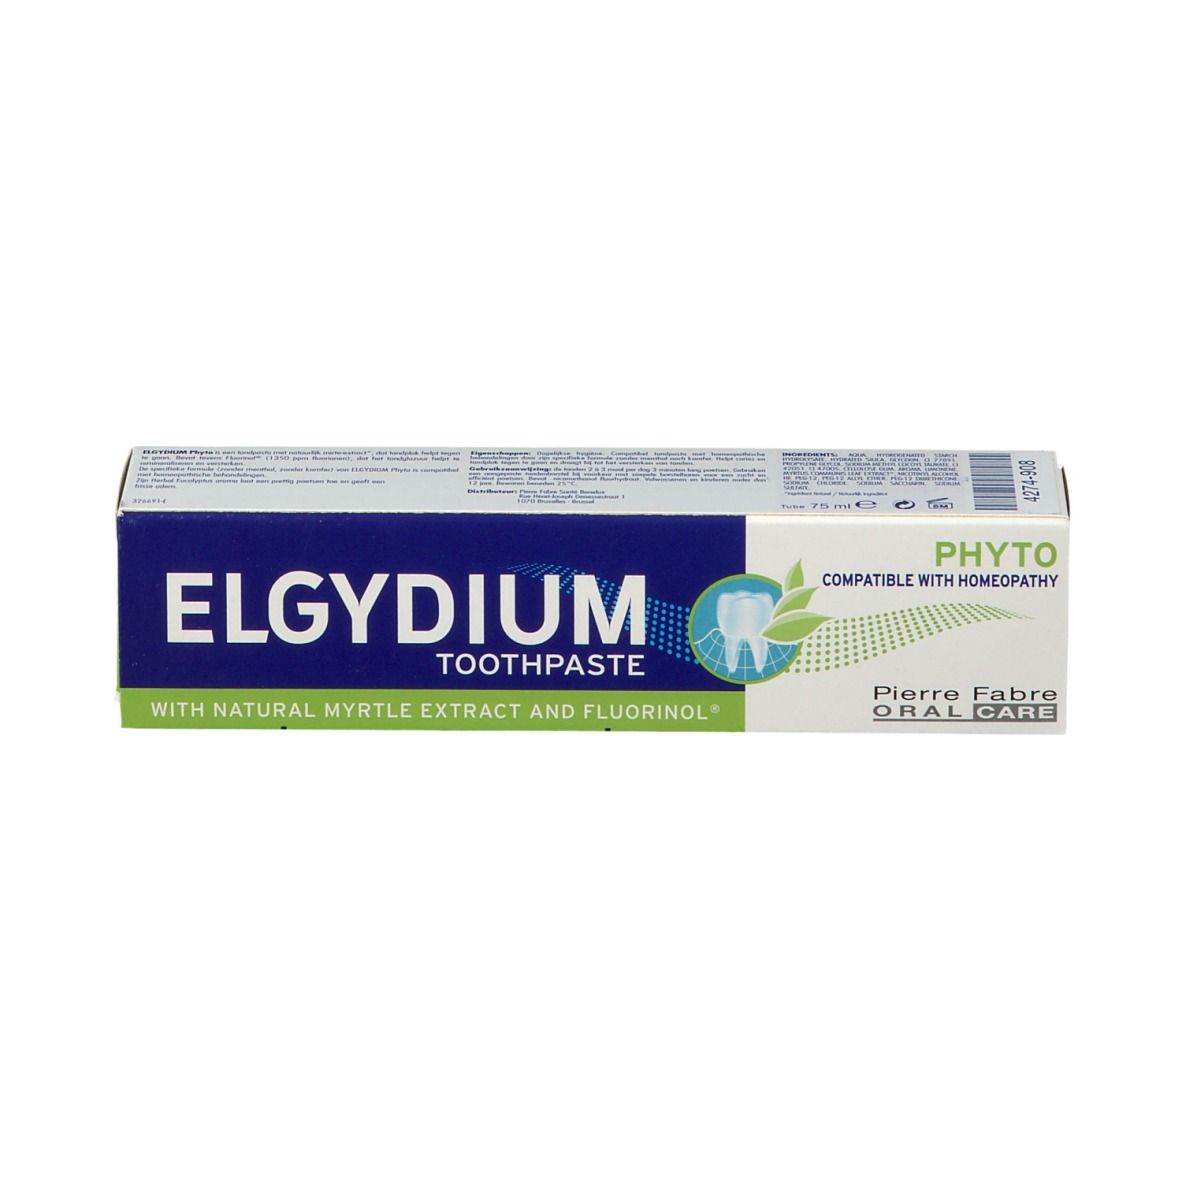 Elgydium Dentifrice Phyto Nouvelle Formule